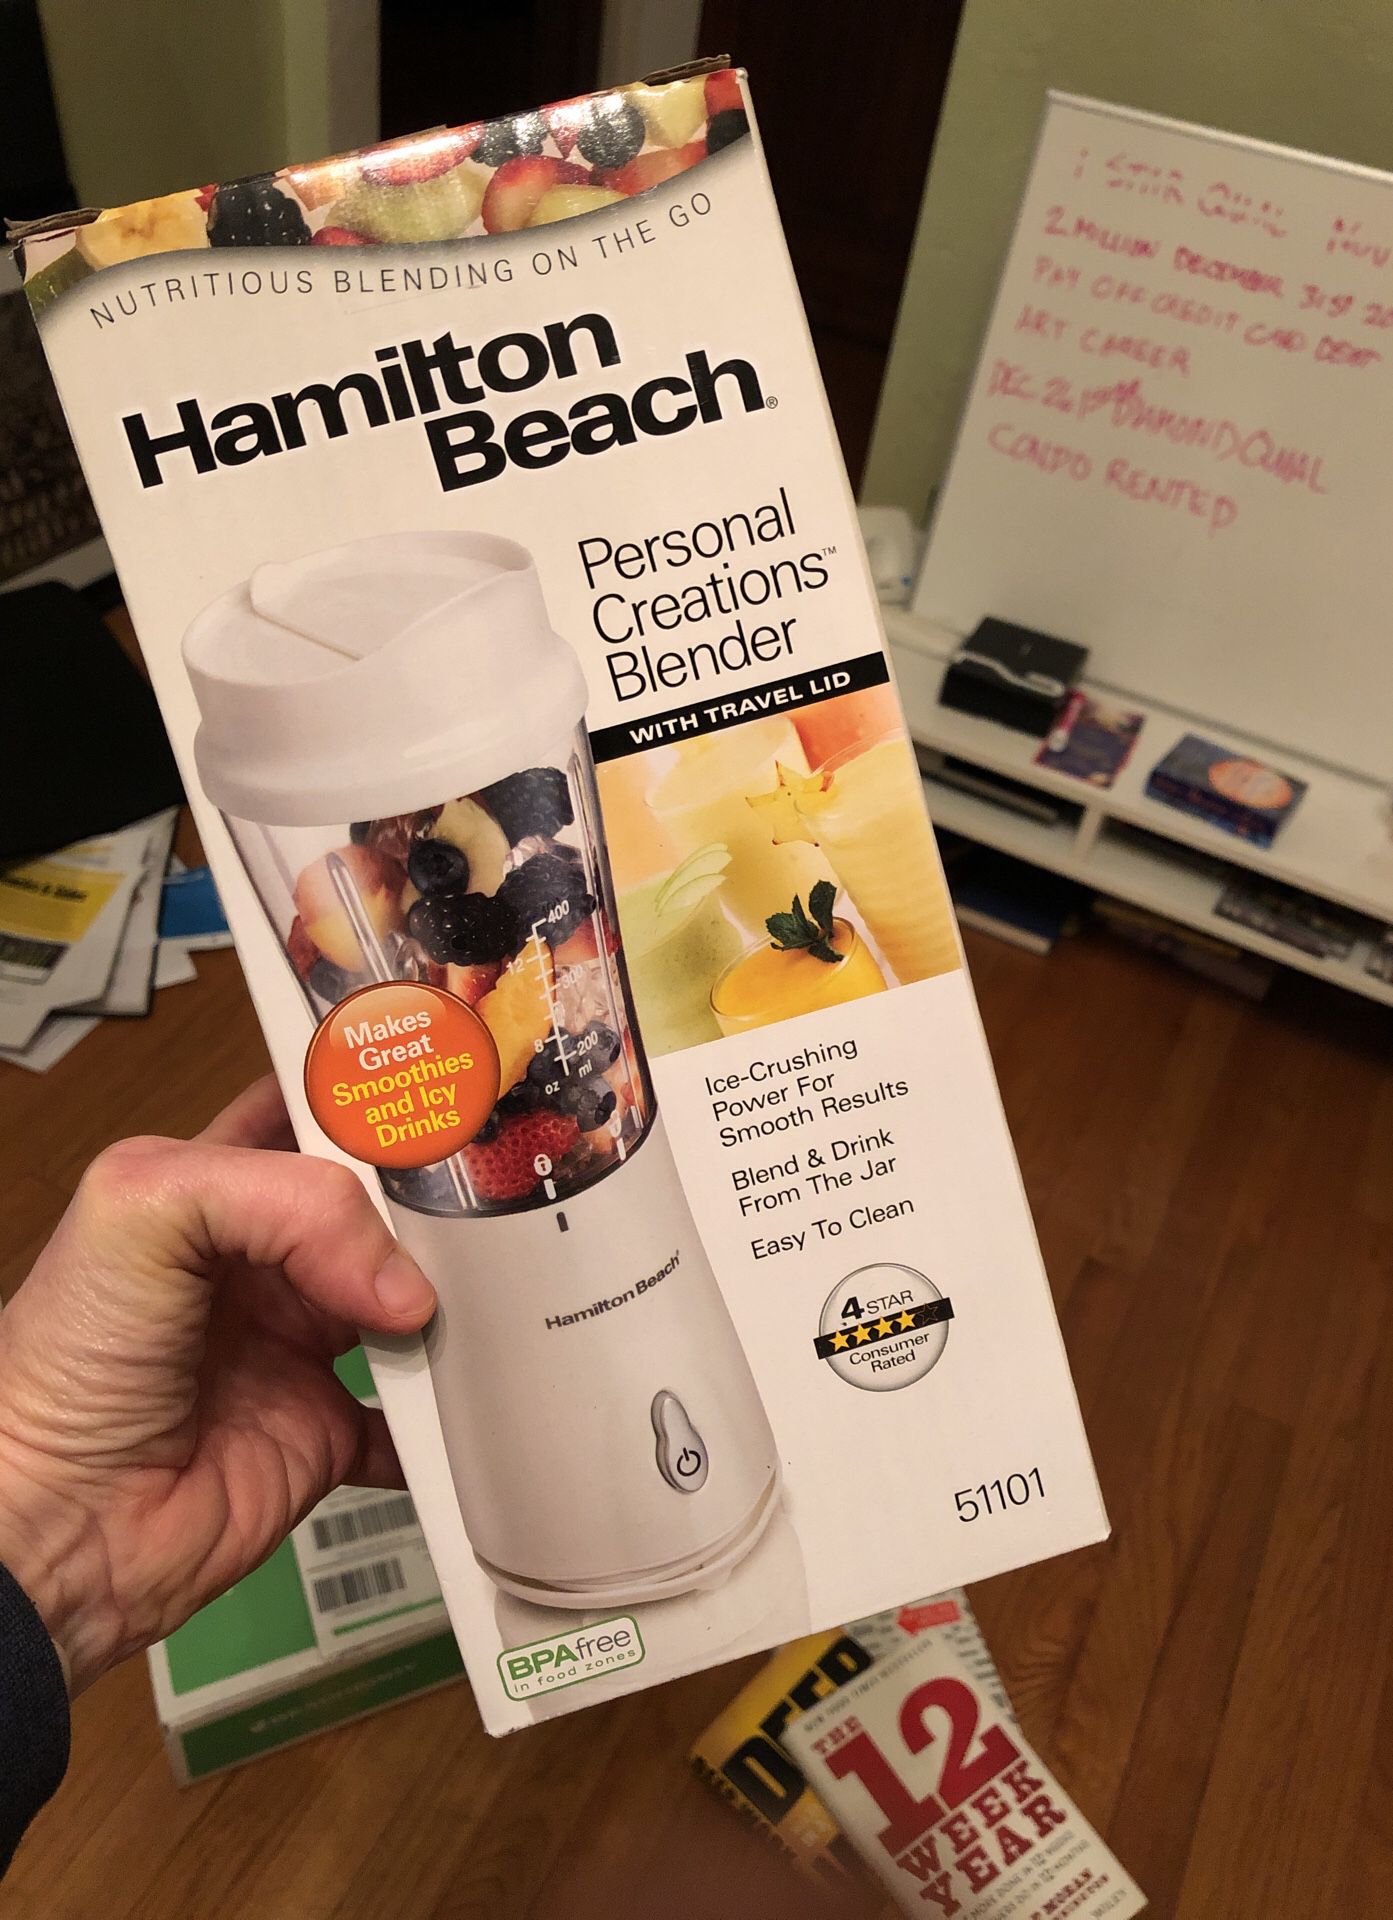 Hamilton Beach personal creations blender with travel lid